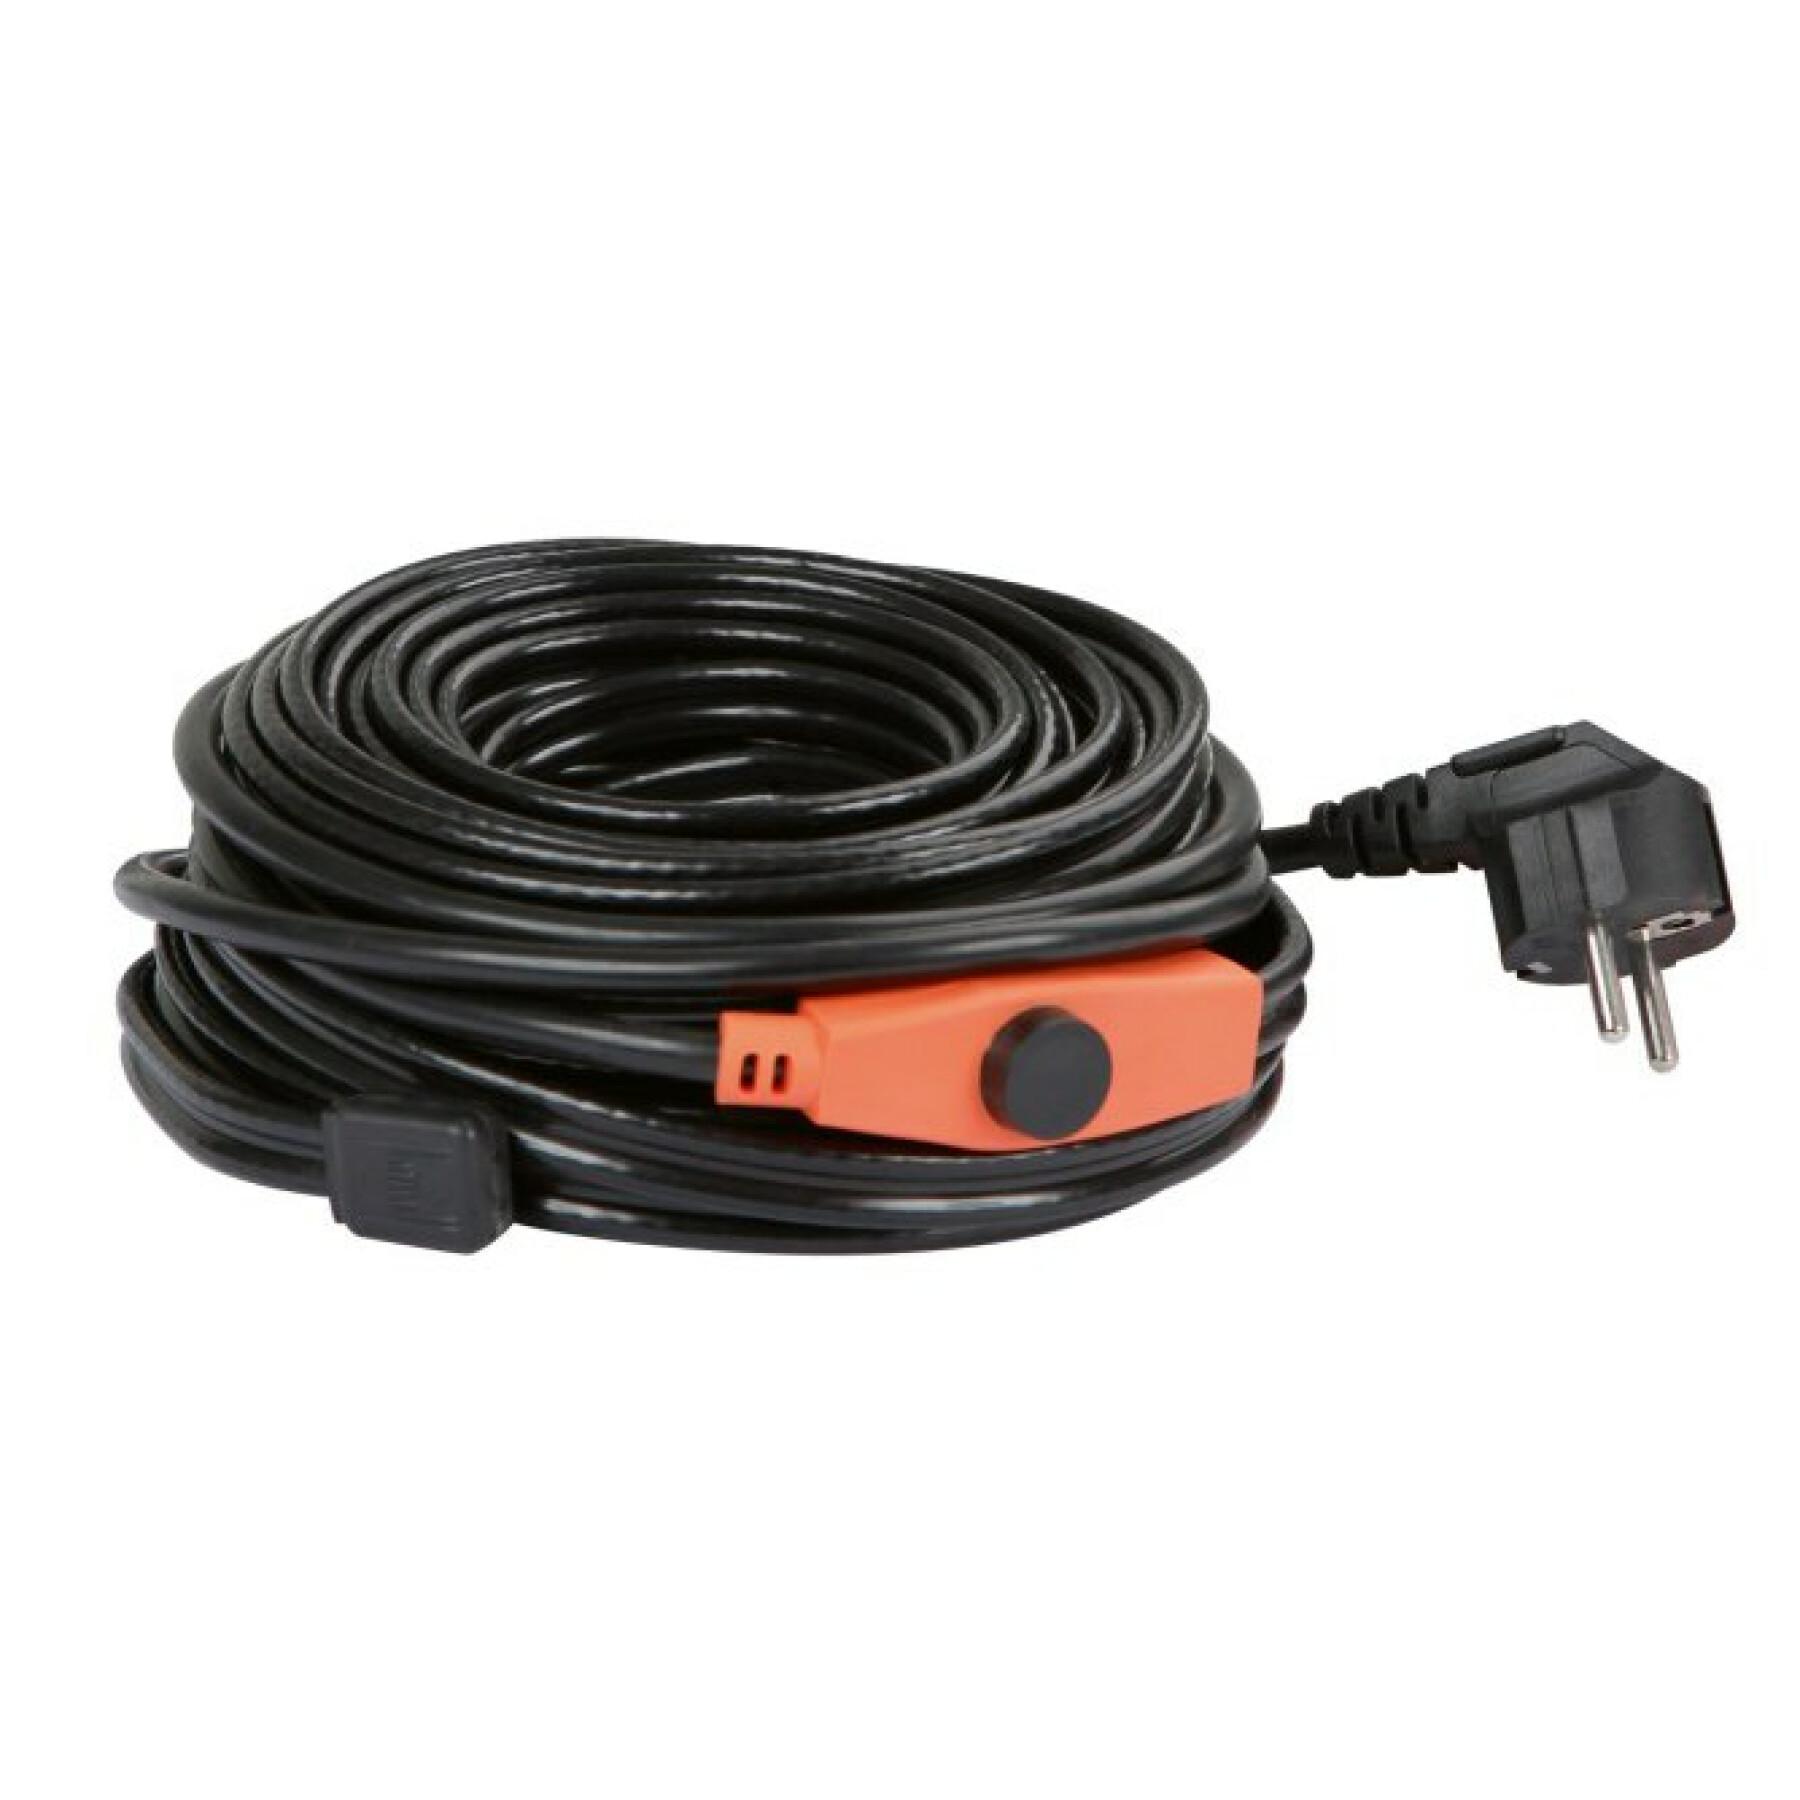 Heating cable Kerbl 230V 49m,784W